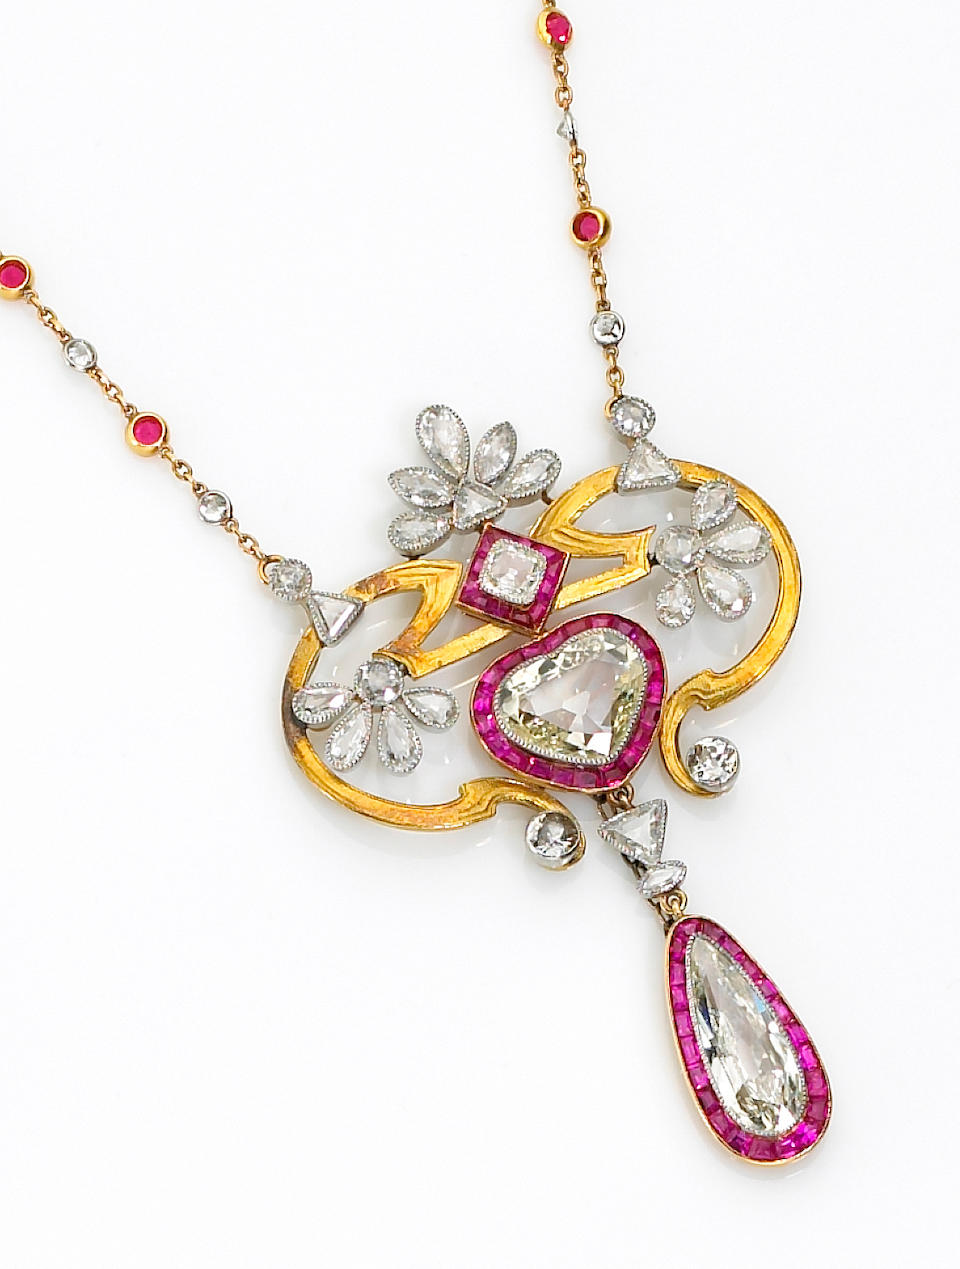 An antique diamond and ruby pendant necklace, French,